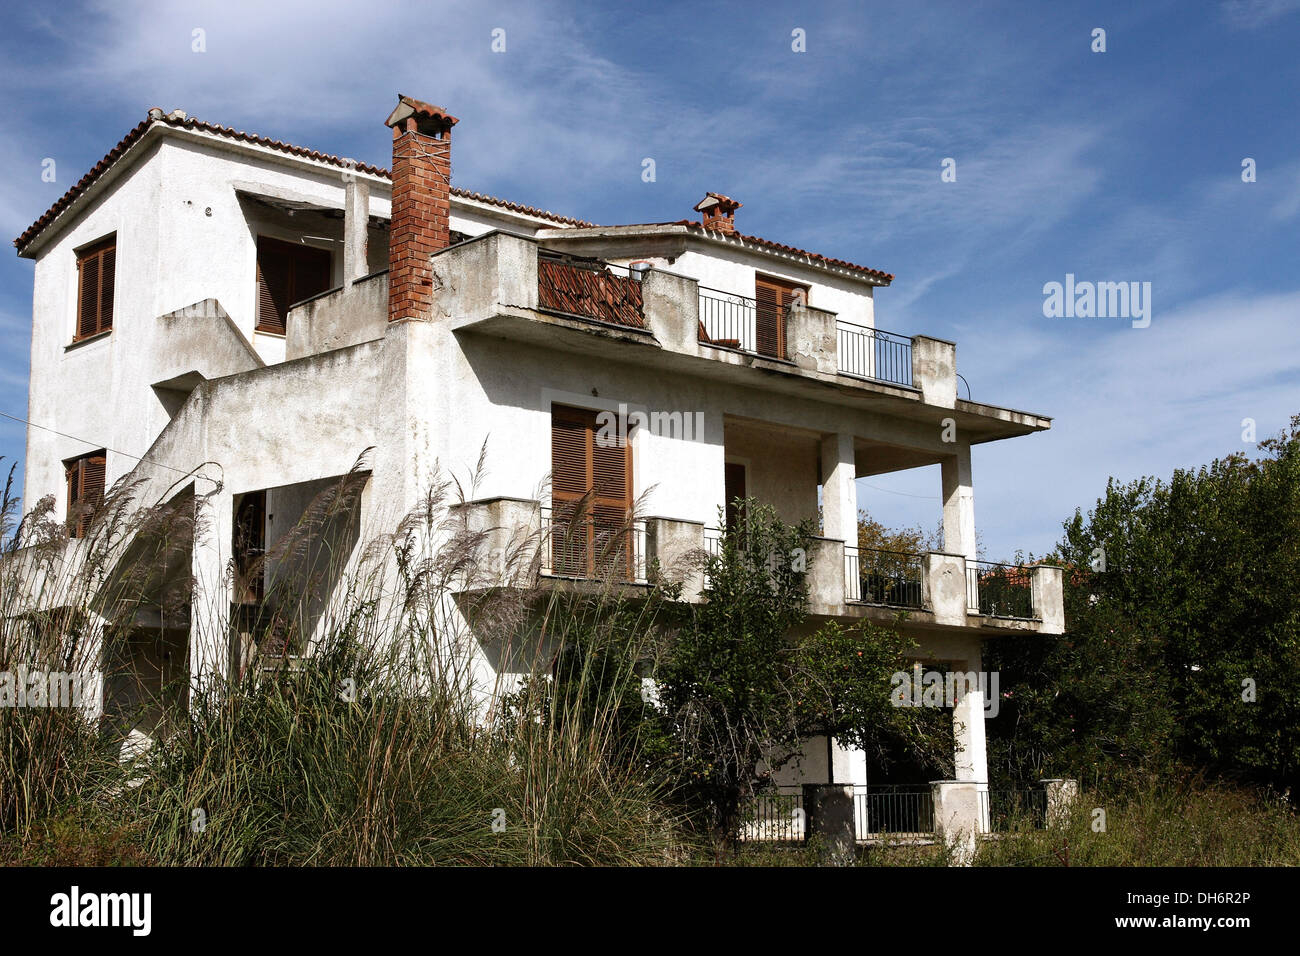 An empty property looking slightly run down on the Greek Island of Skiathos, a popular tourist destination in the Aegean Sea. Stock Photo